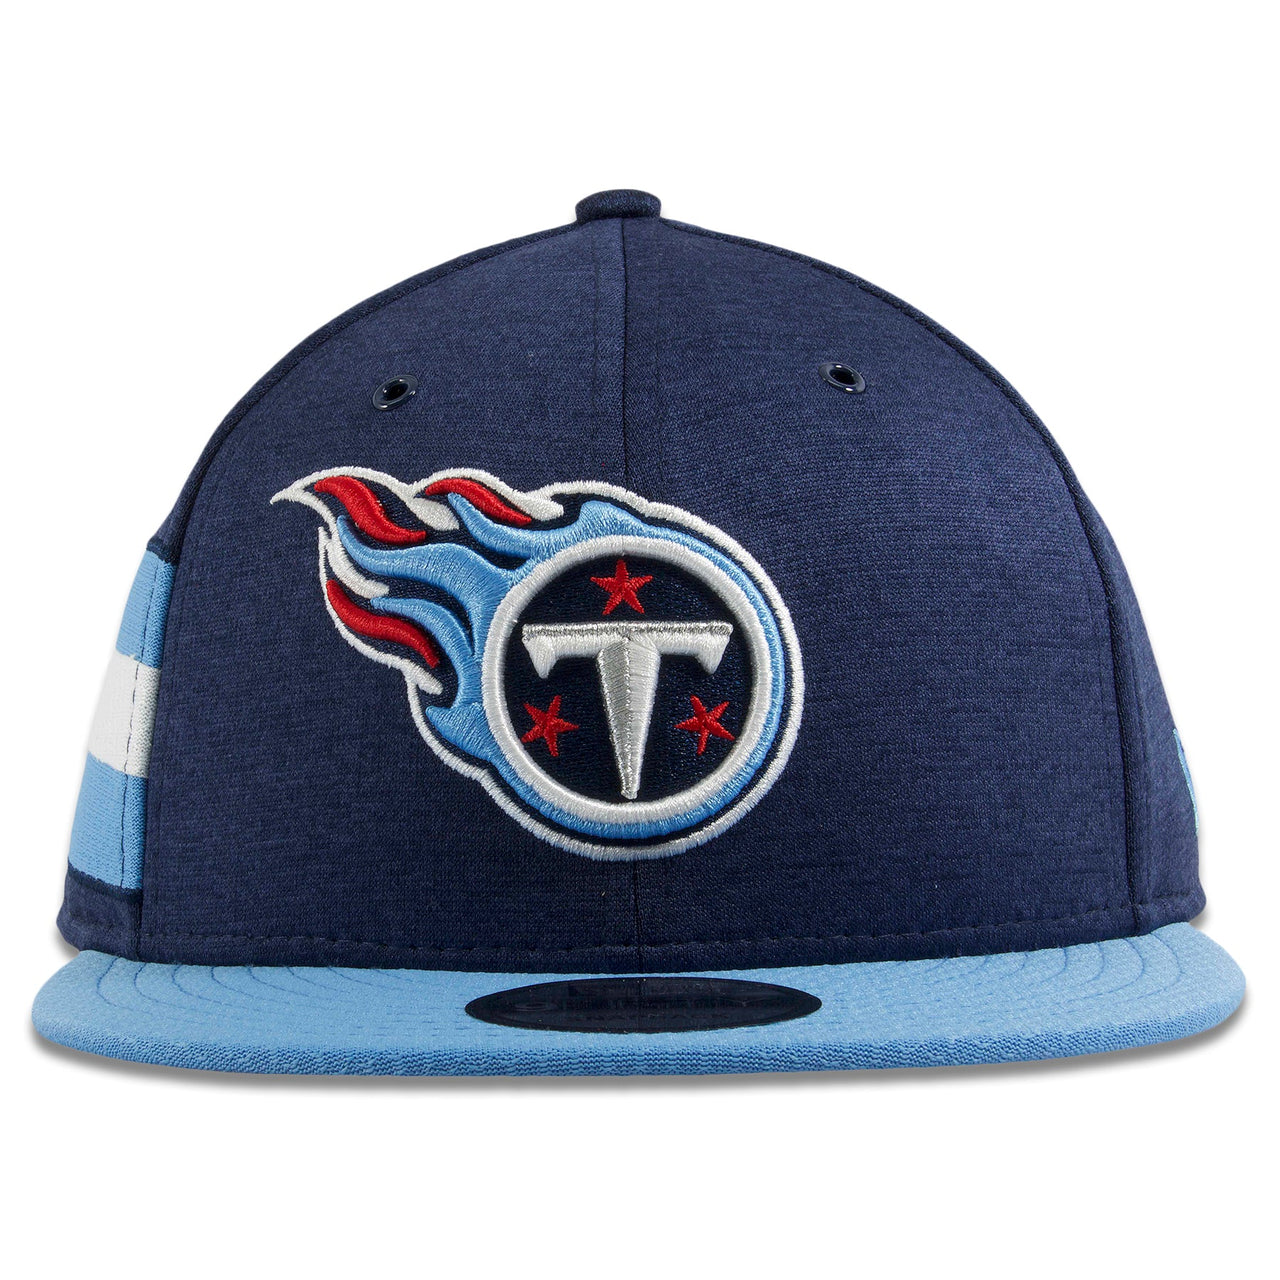 The tennessee titans on field 2018 snapback hat has the tennessee titans logo embroidered